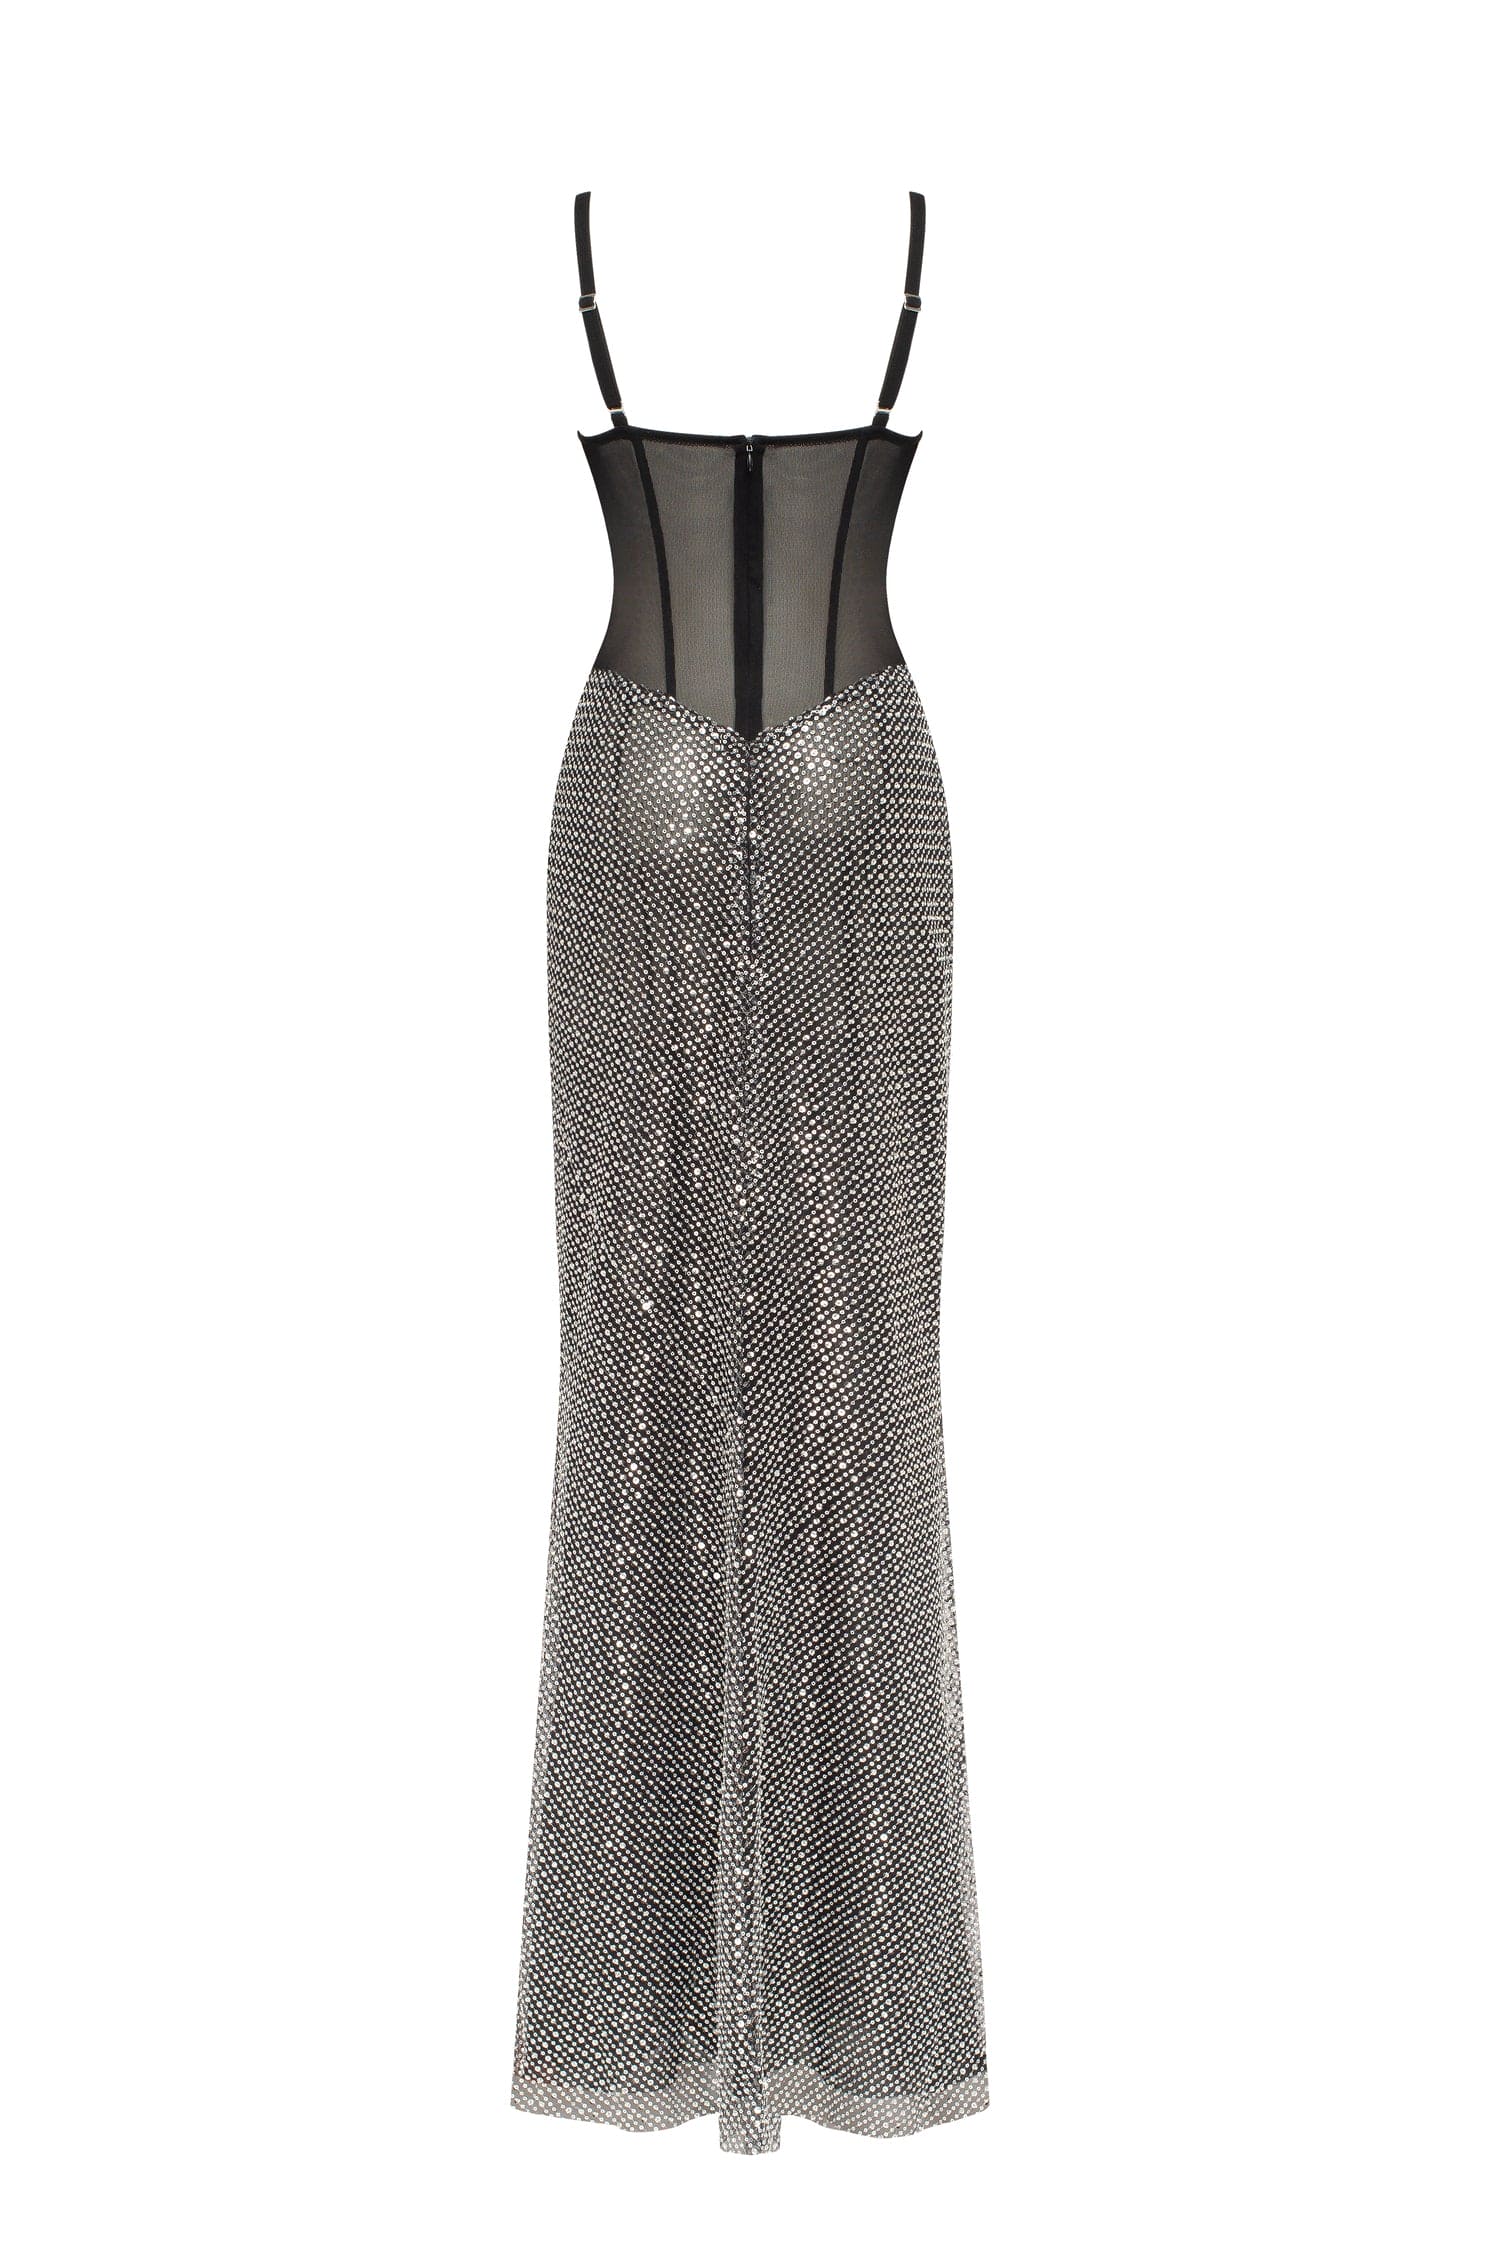 Black corset maxi dress with silver sequined maxi skirt, Smoky Quartz ➤➤  Milla Dresses - USA, Worldwide delivery